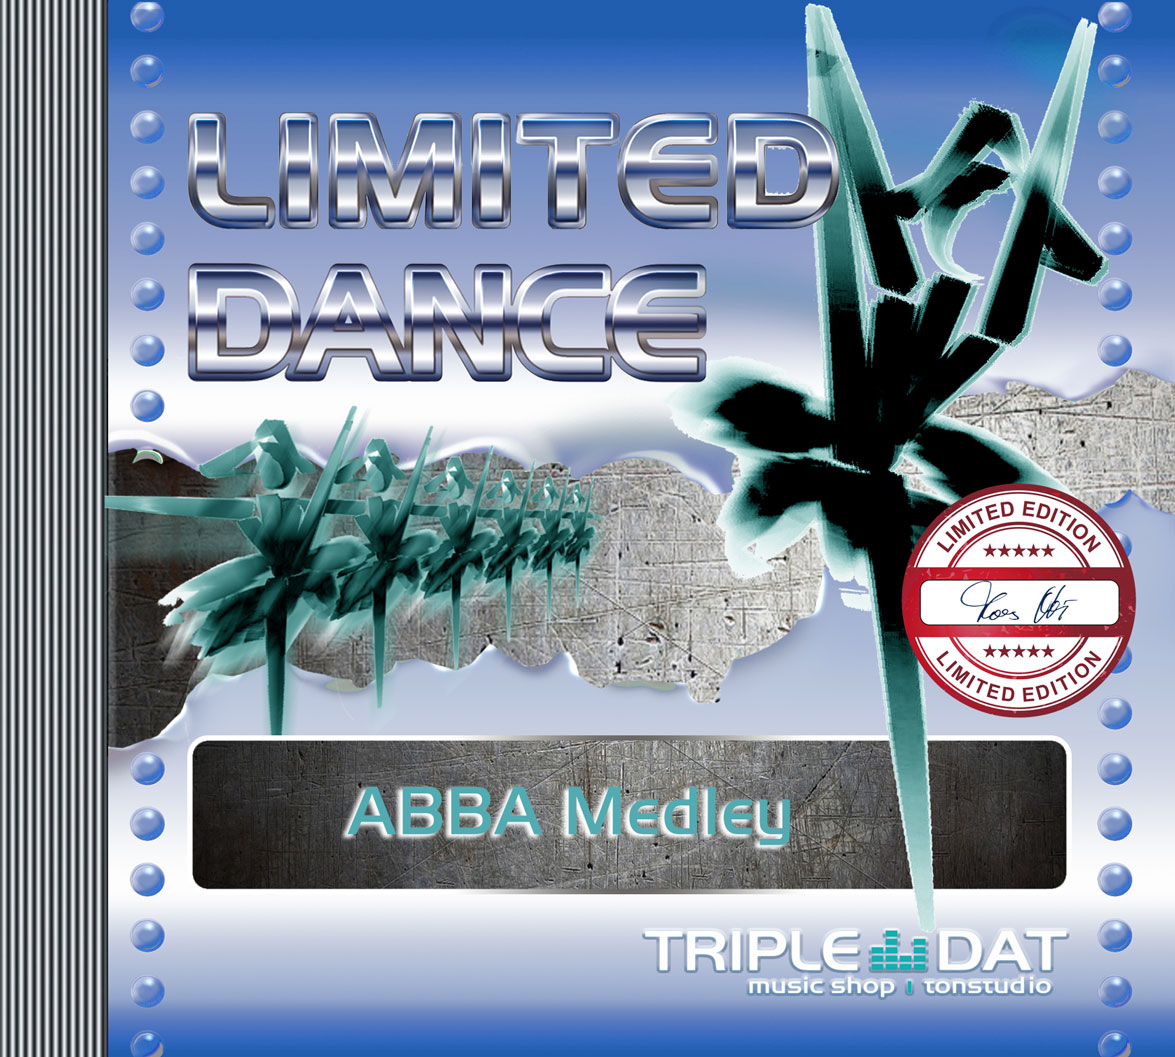 Limited Dance - ABBA Medley - Download